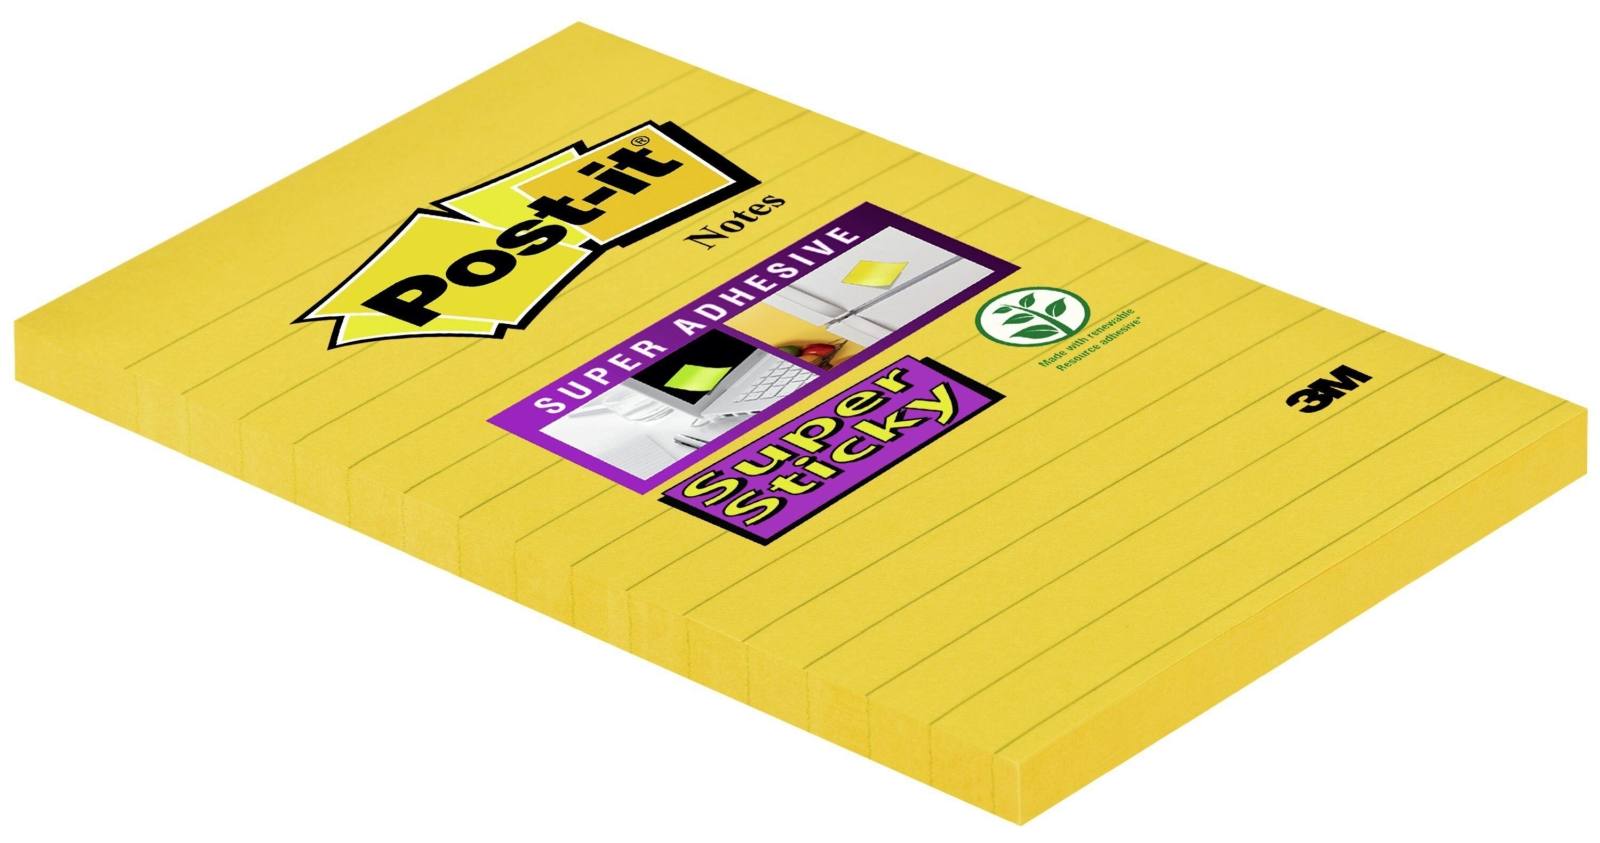 3M Post-it Super Sticky Notes 660-S, 102 mm x 152 mm, daffodil yellow, 1 pad of 75 sheets